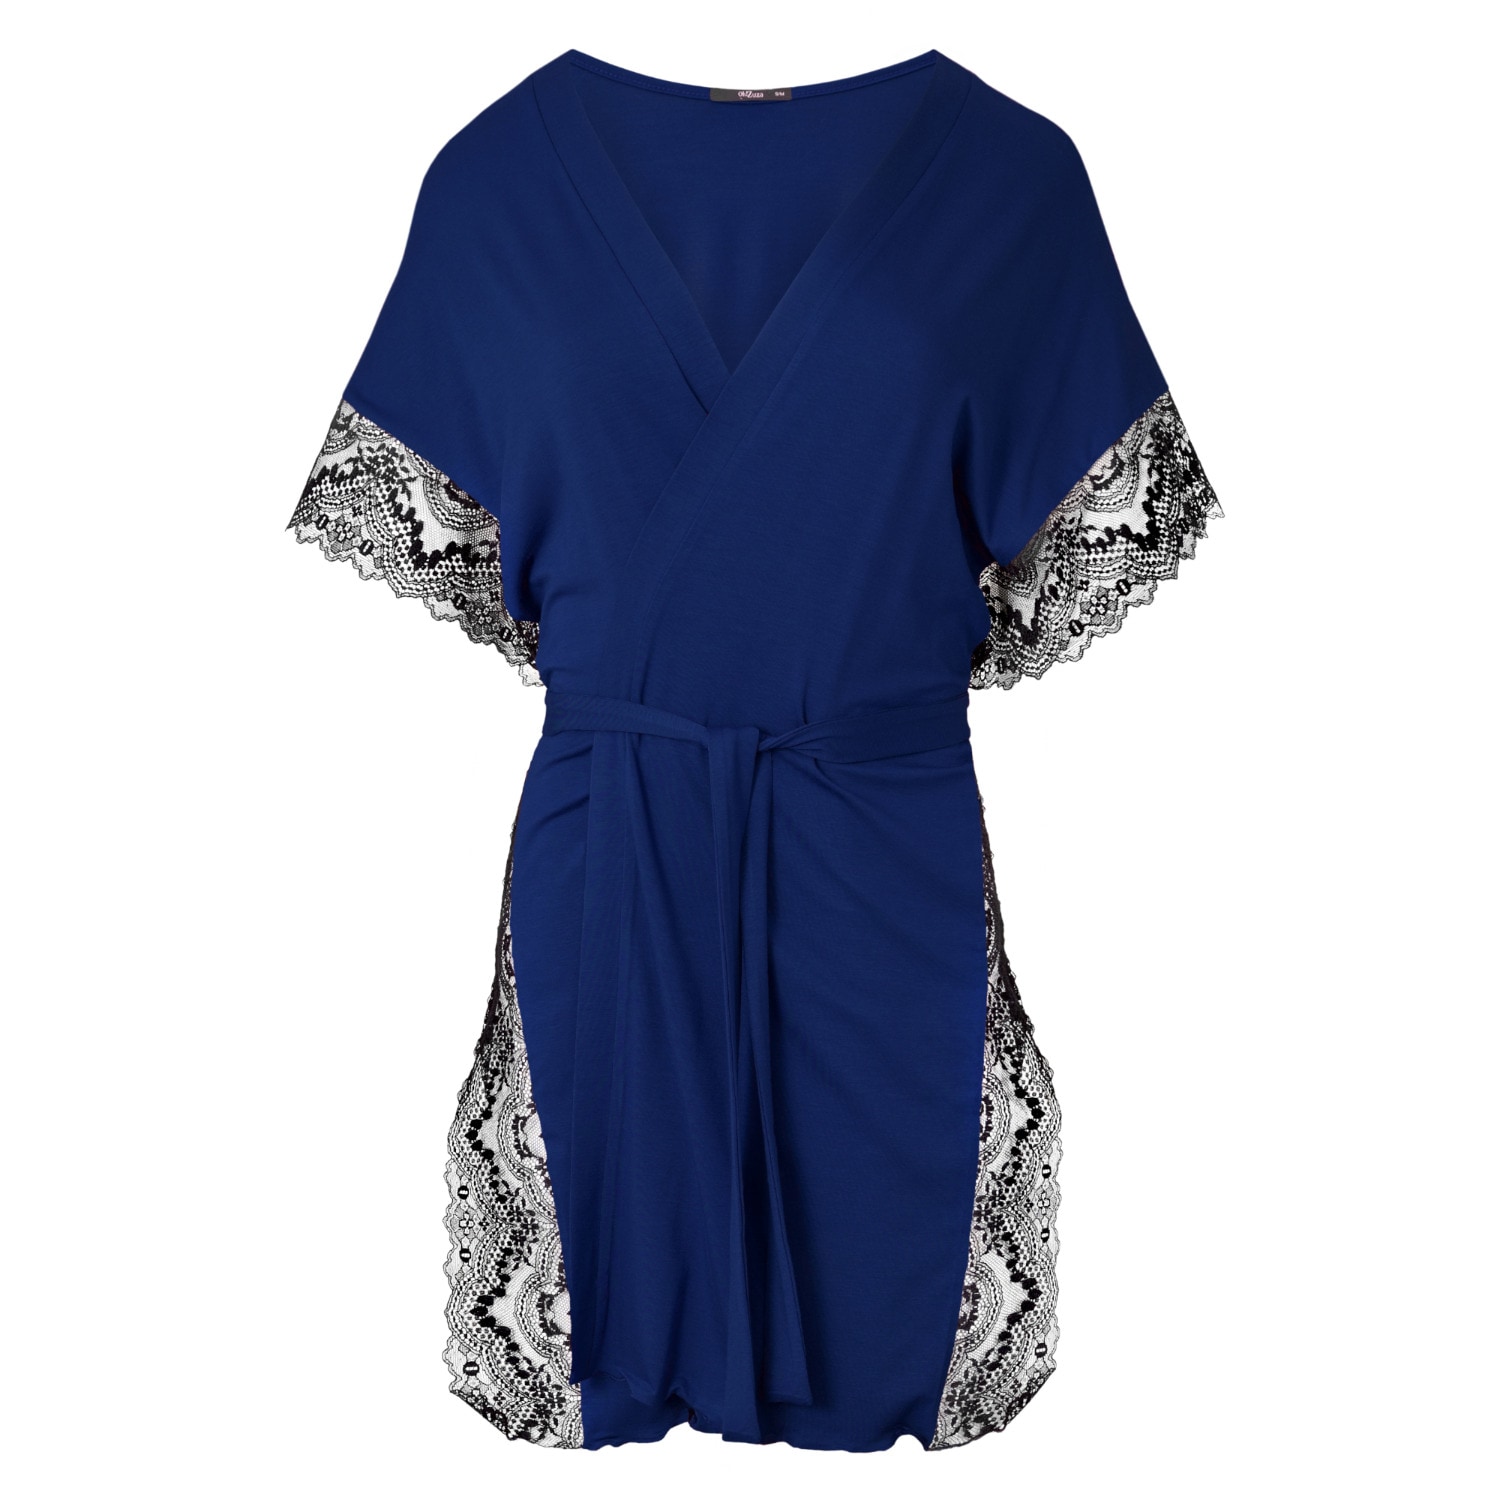 Oh!zuza Night&day Women's Sensual Delicate Short Robe - French Leavers Lace - Blue